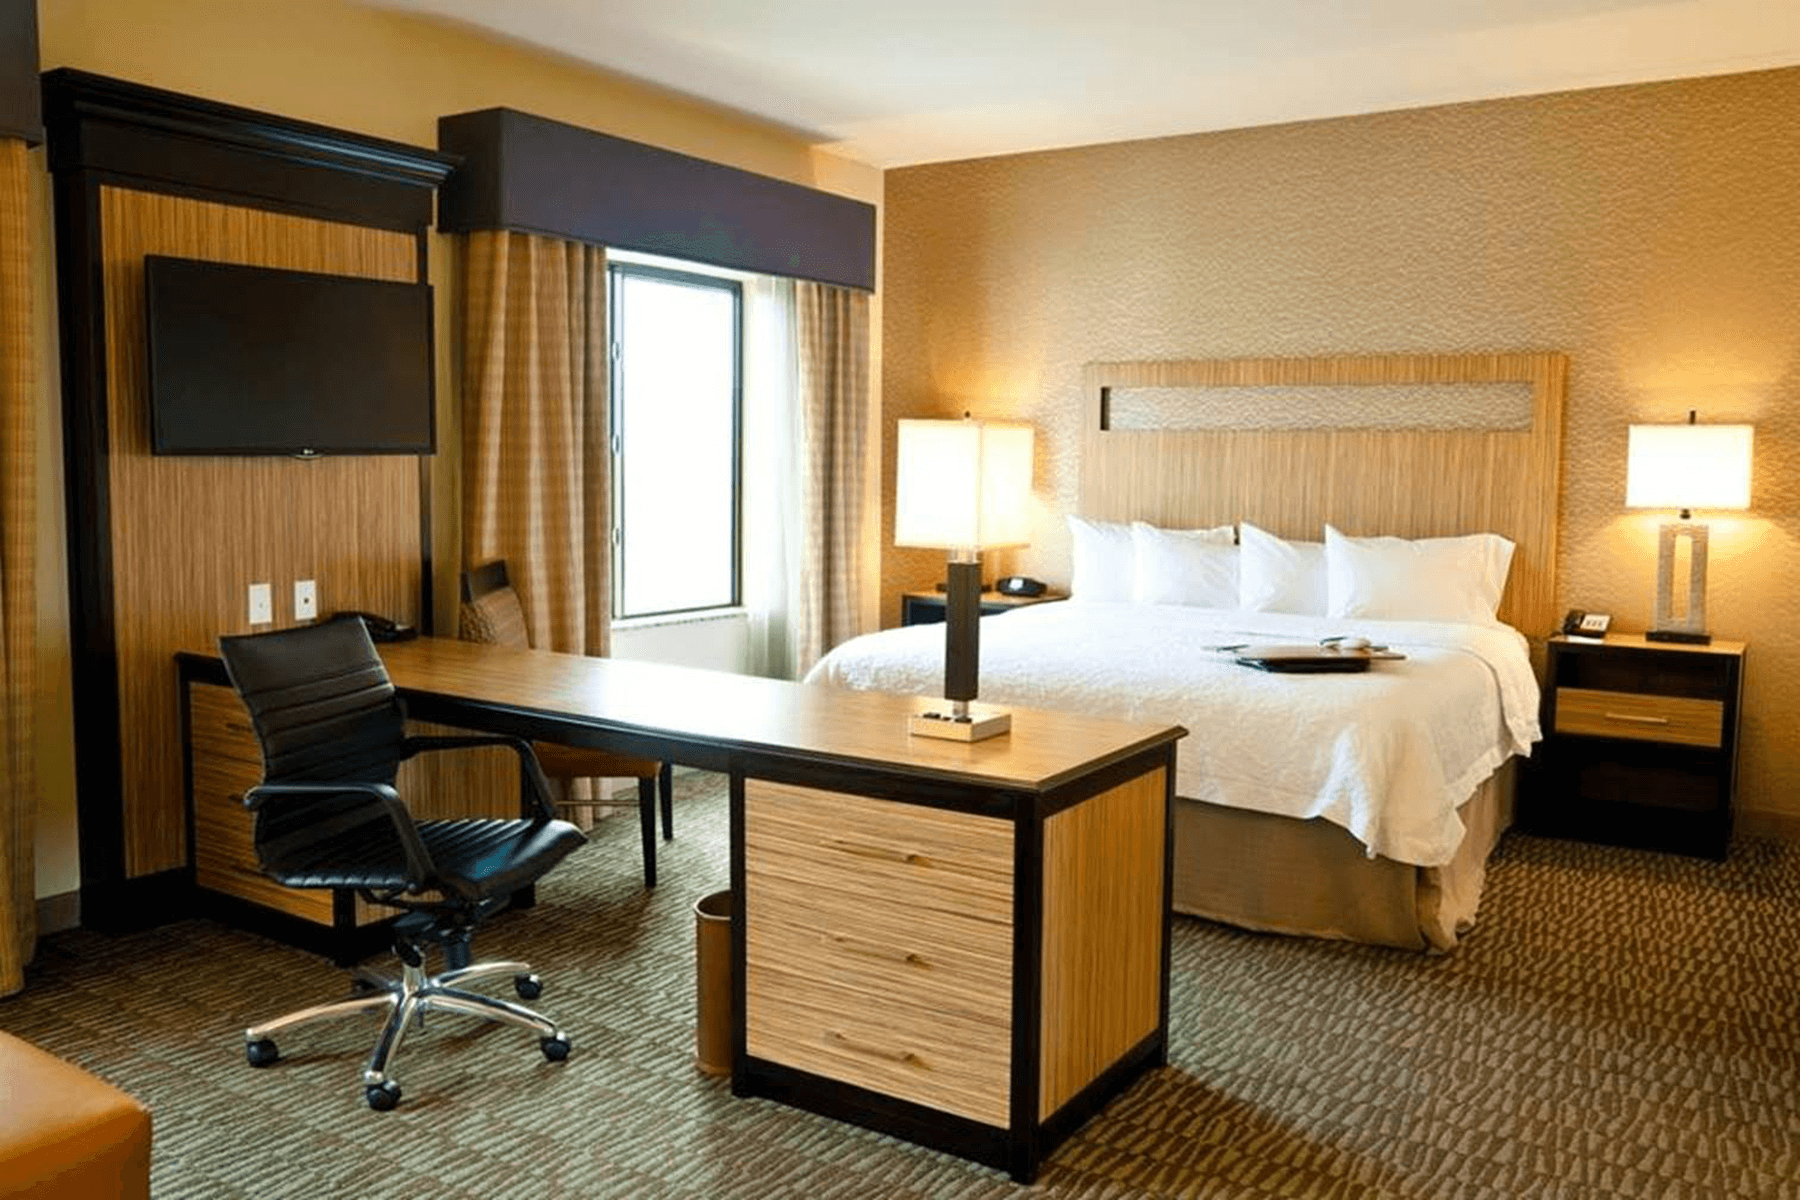  Hampton Inn and Suites Salinas room interior with king size bed and desk 